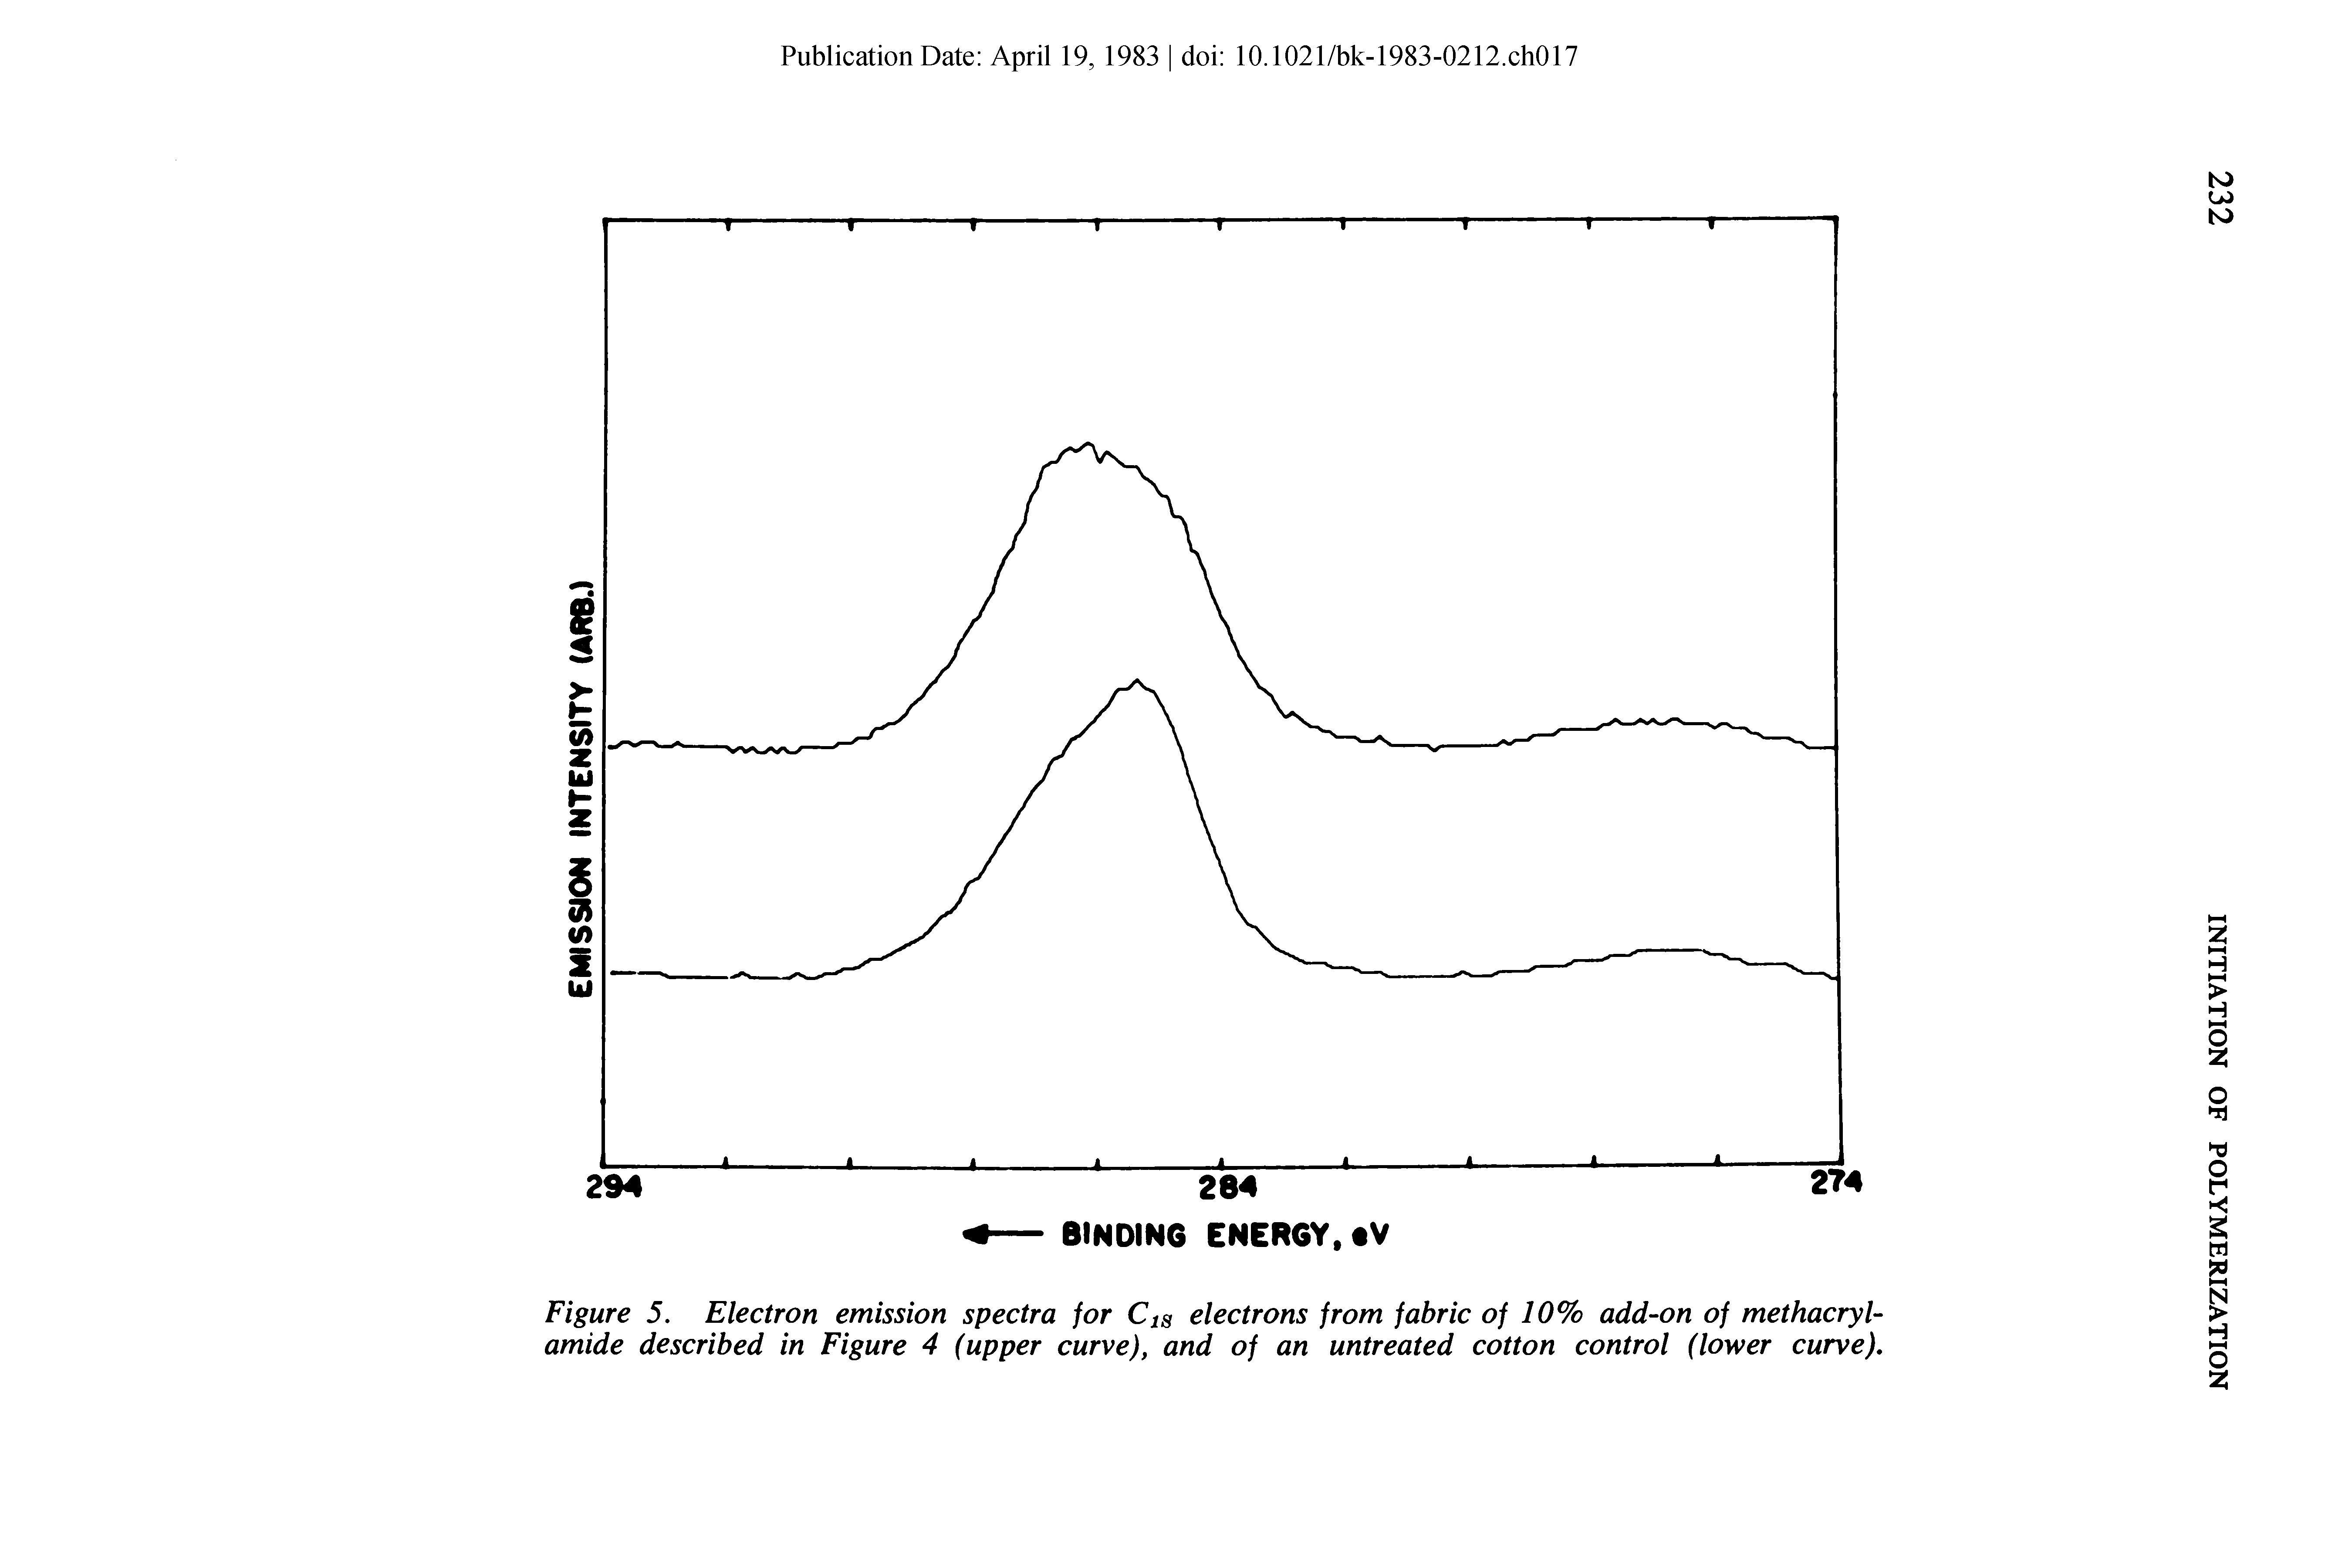 Figure 5. Electron emission spectra for Cjs electrons from fabric of 10% add-on of methacrylamide described in Figure 4 (upper curve), and of an untreated cotton control (lower curve).